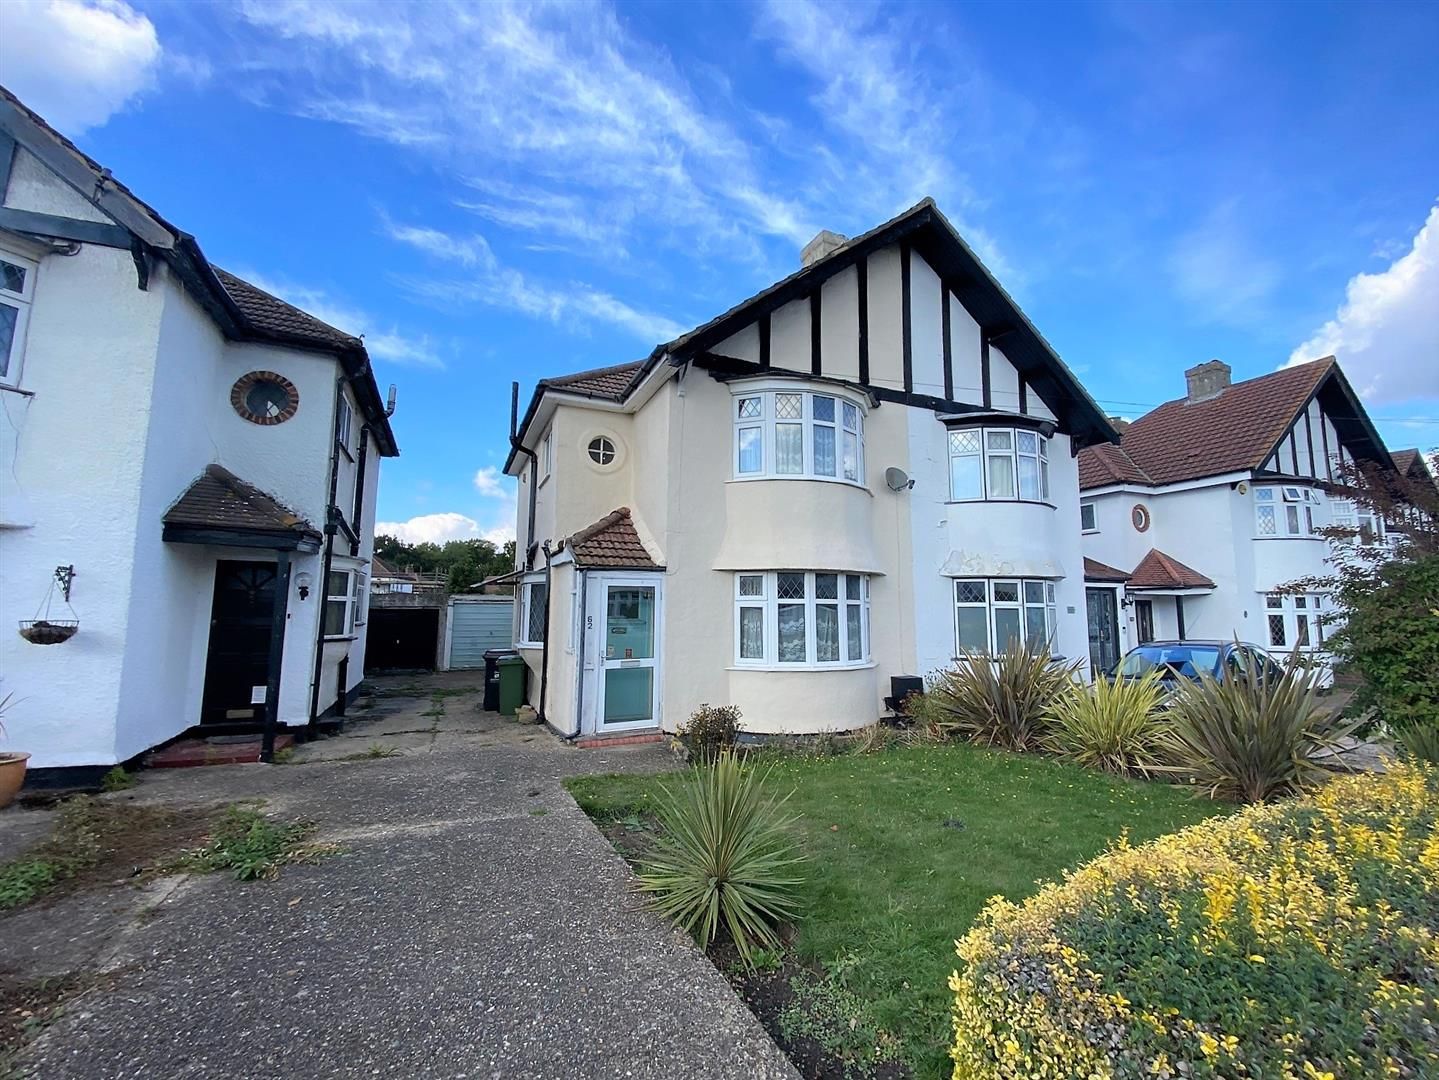 Crest View Drive, Petts Wood, Kent, BR5 1BY